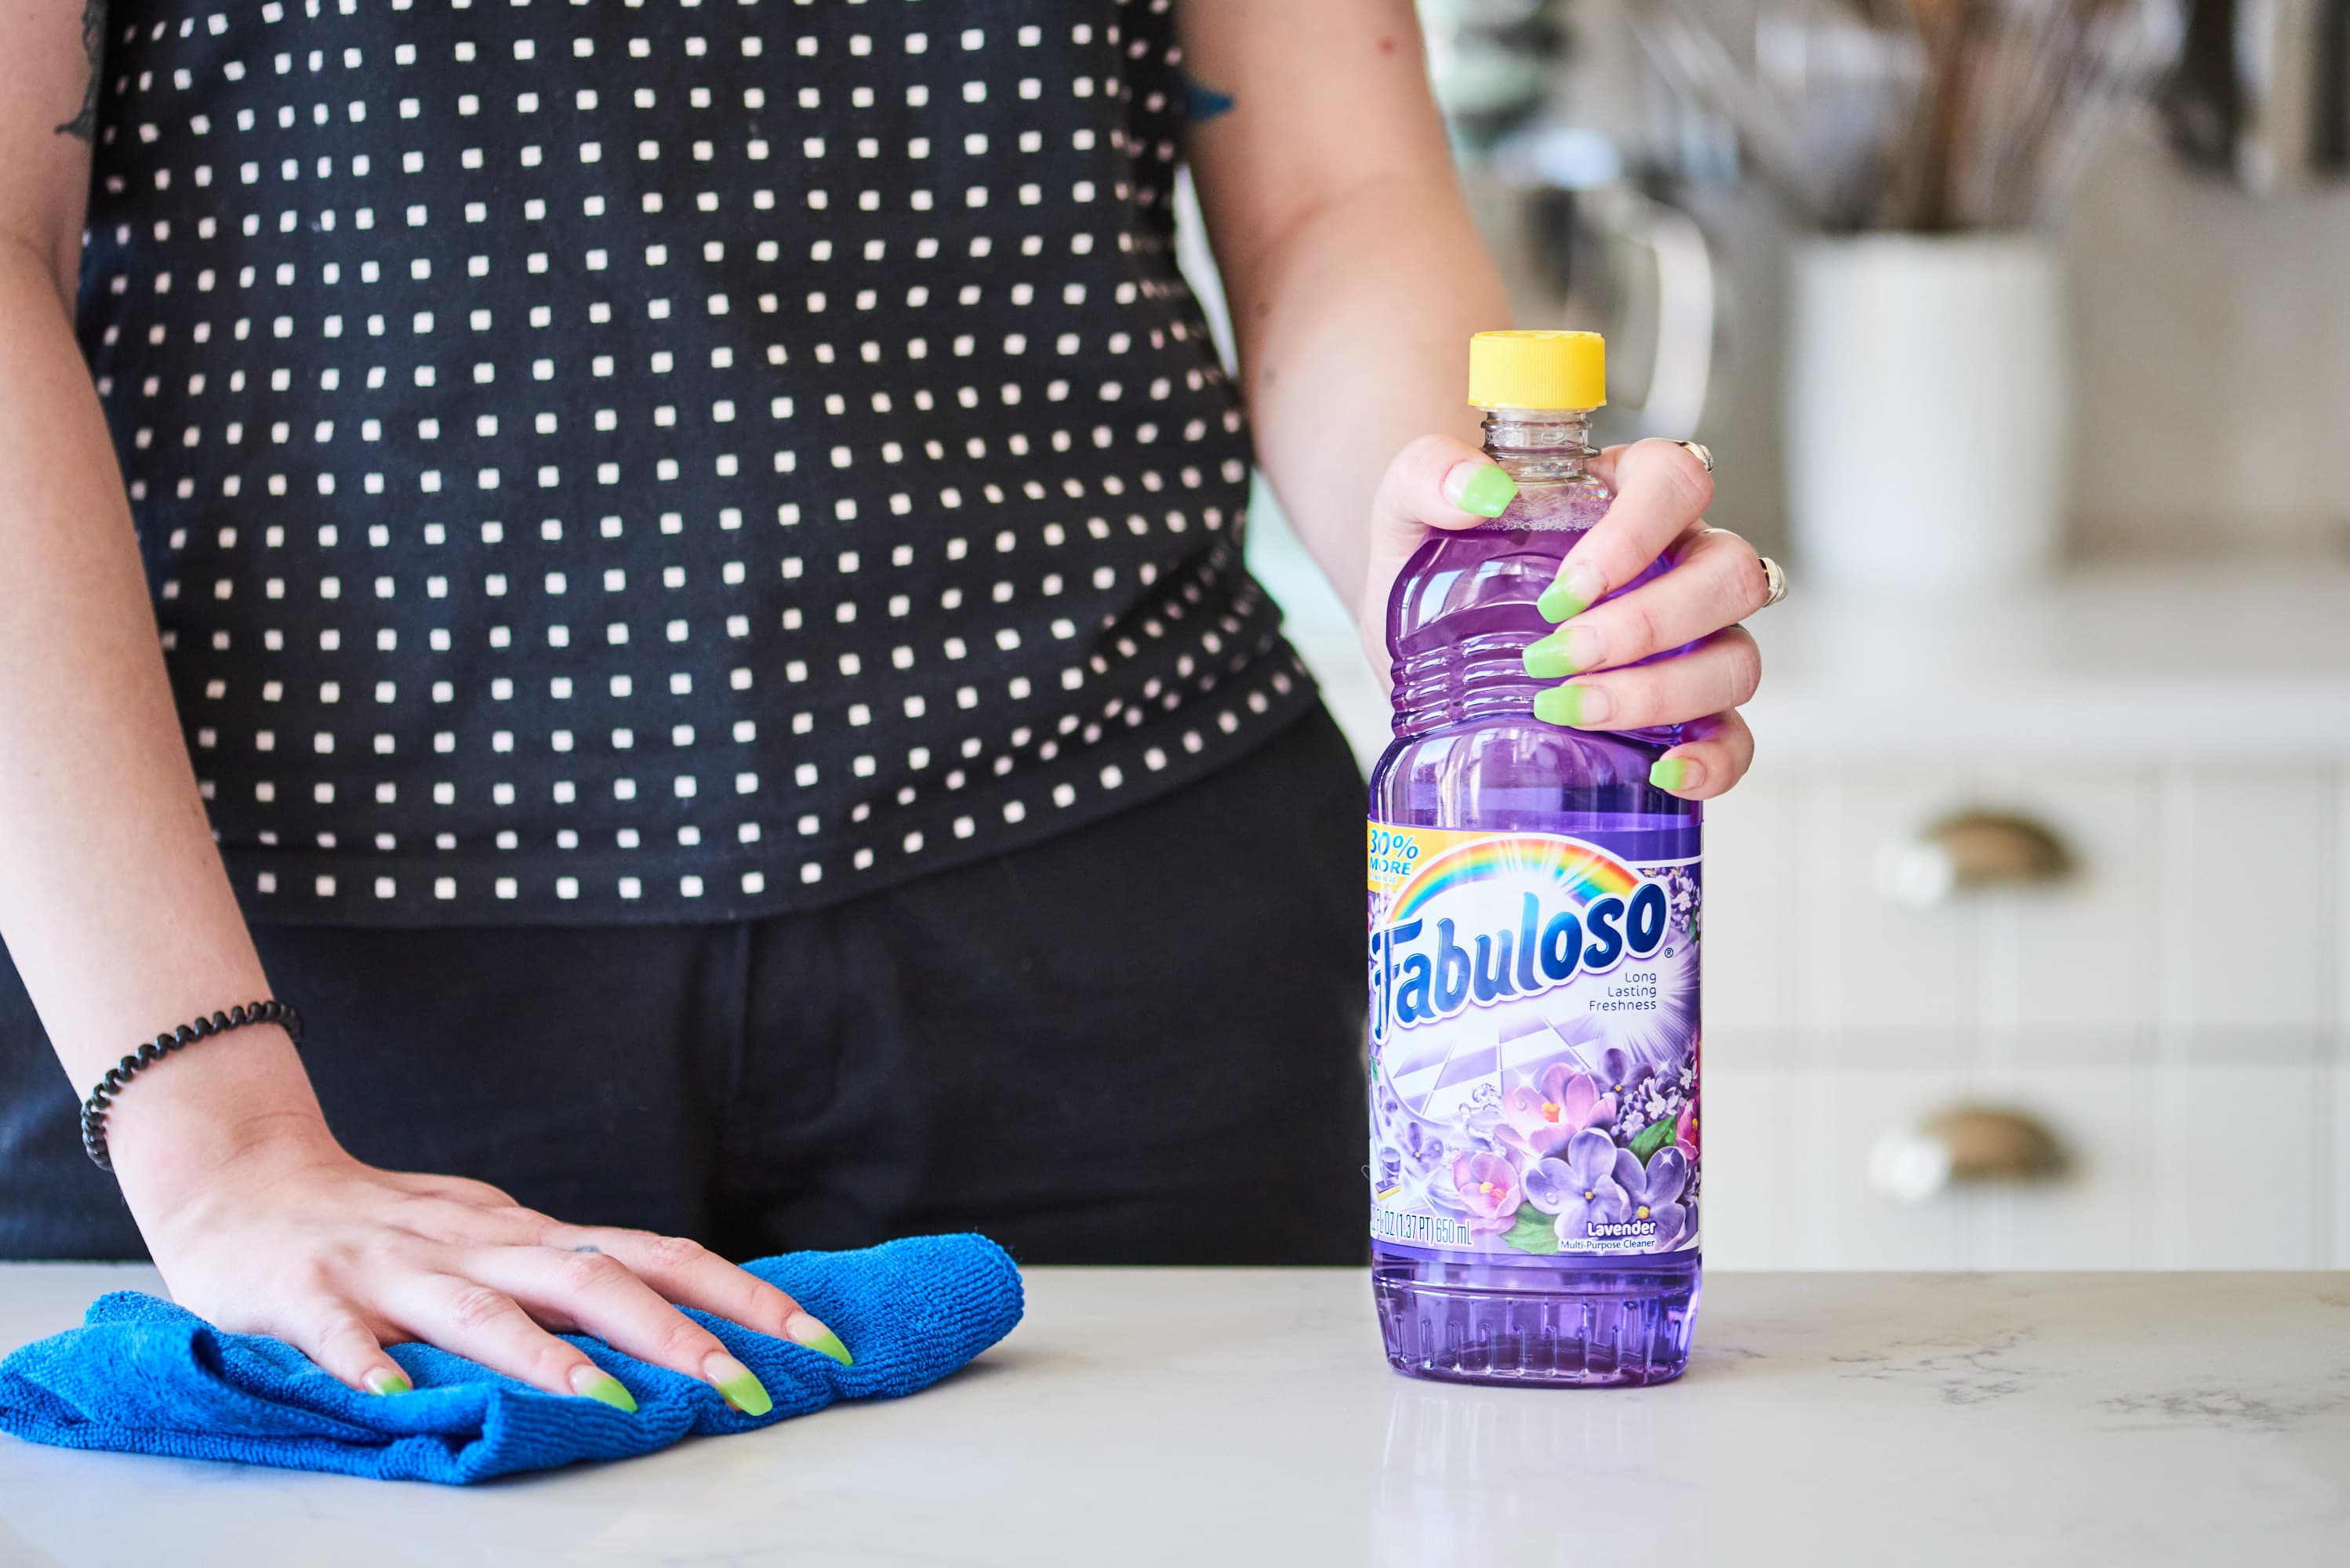 5 Fabuloso Uses — Ways to Use Fabuloso Cleaner | Apartment Therapy